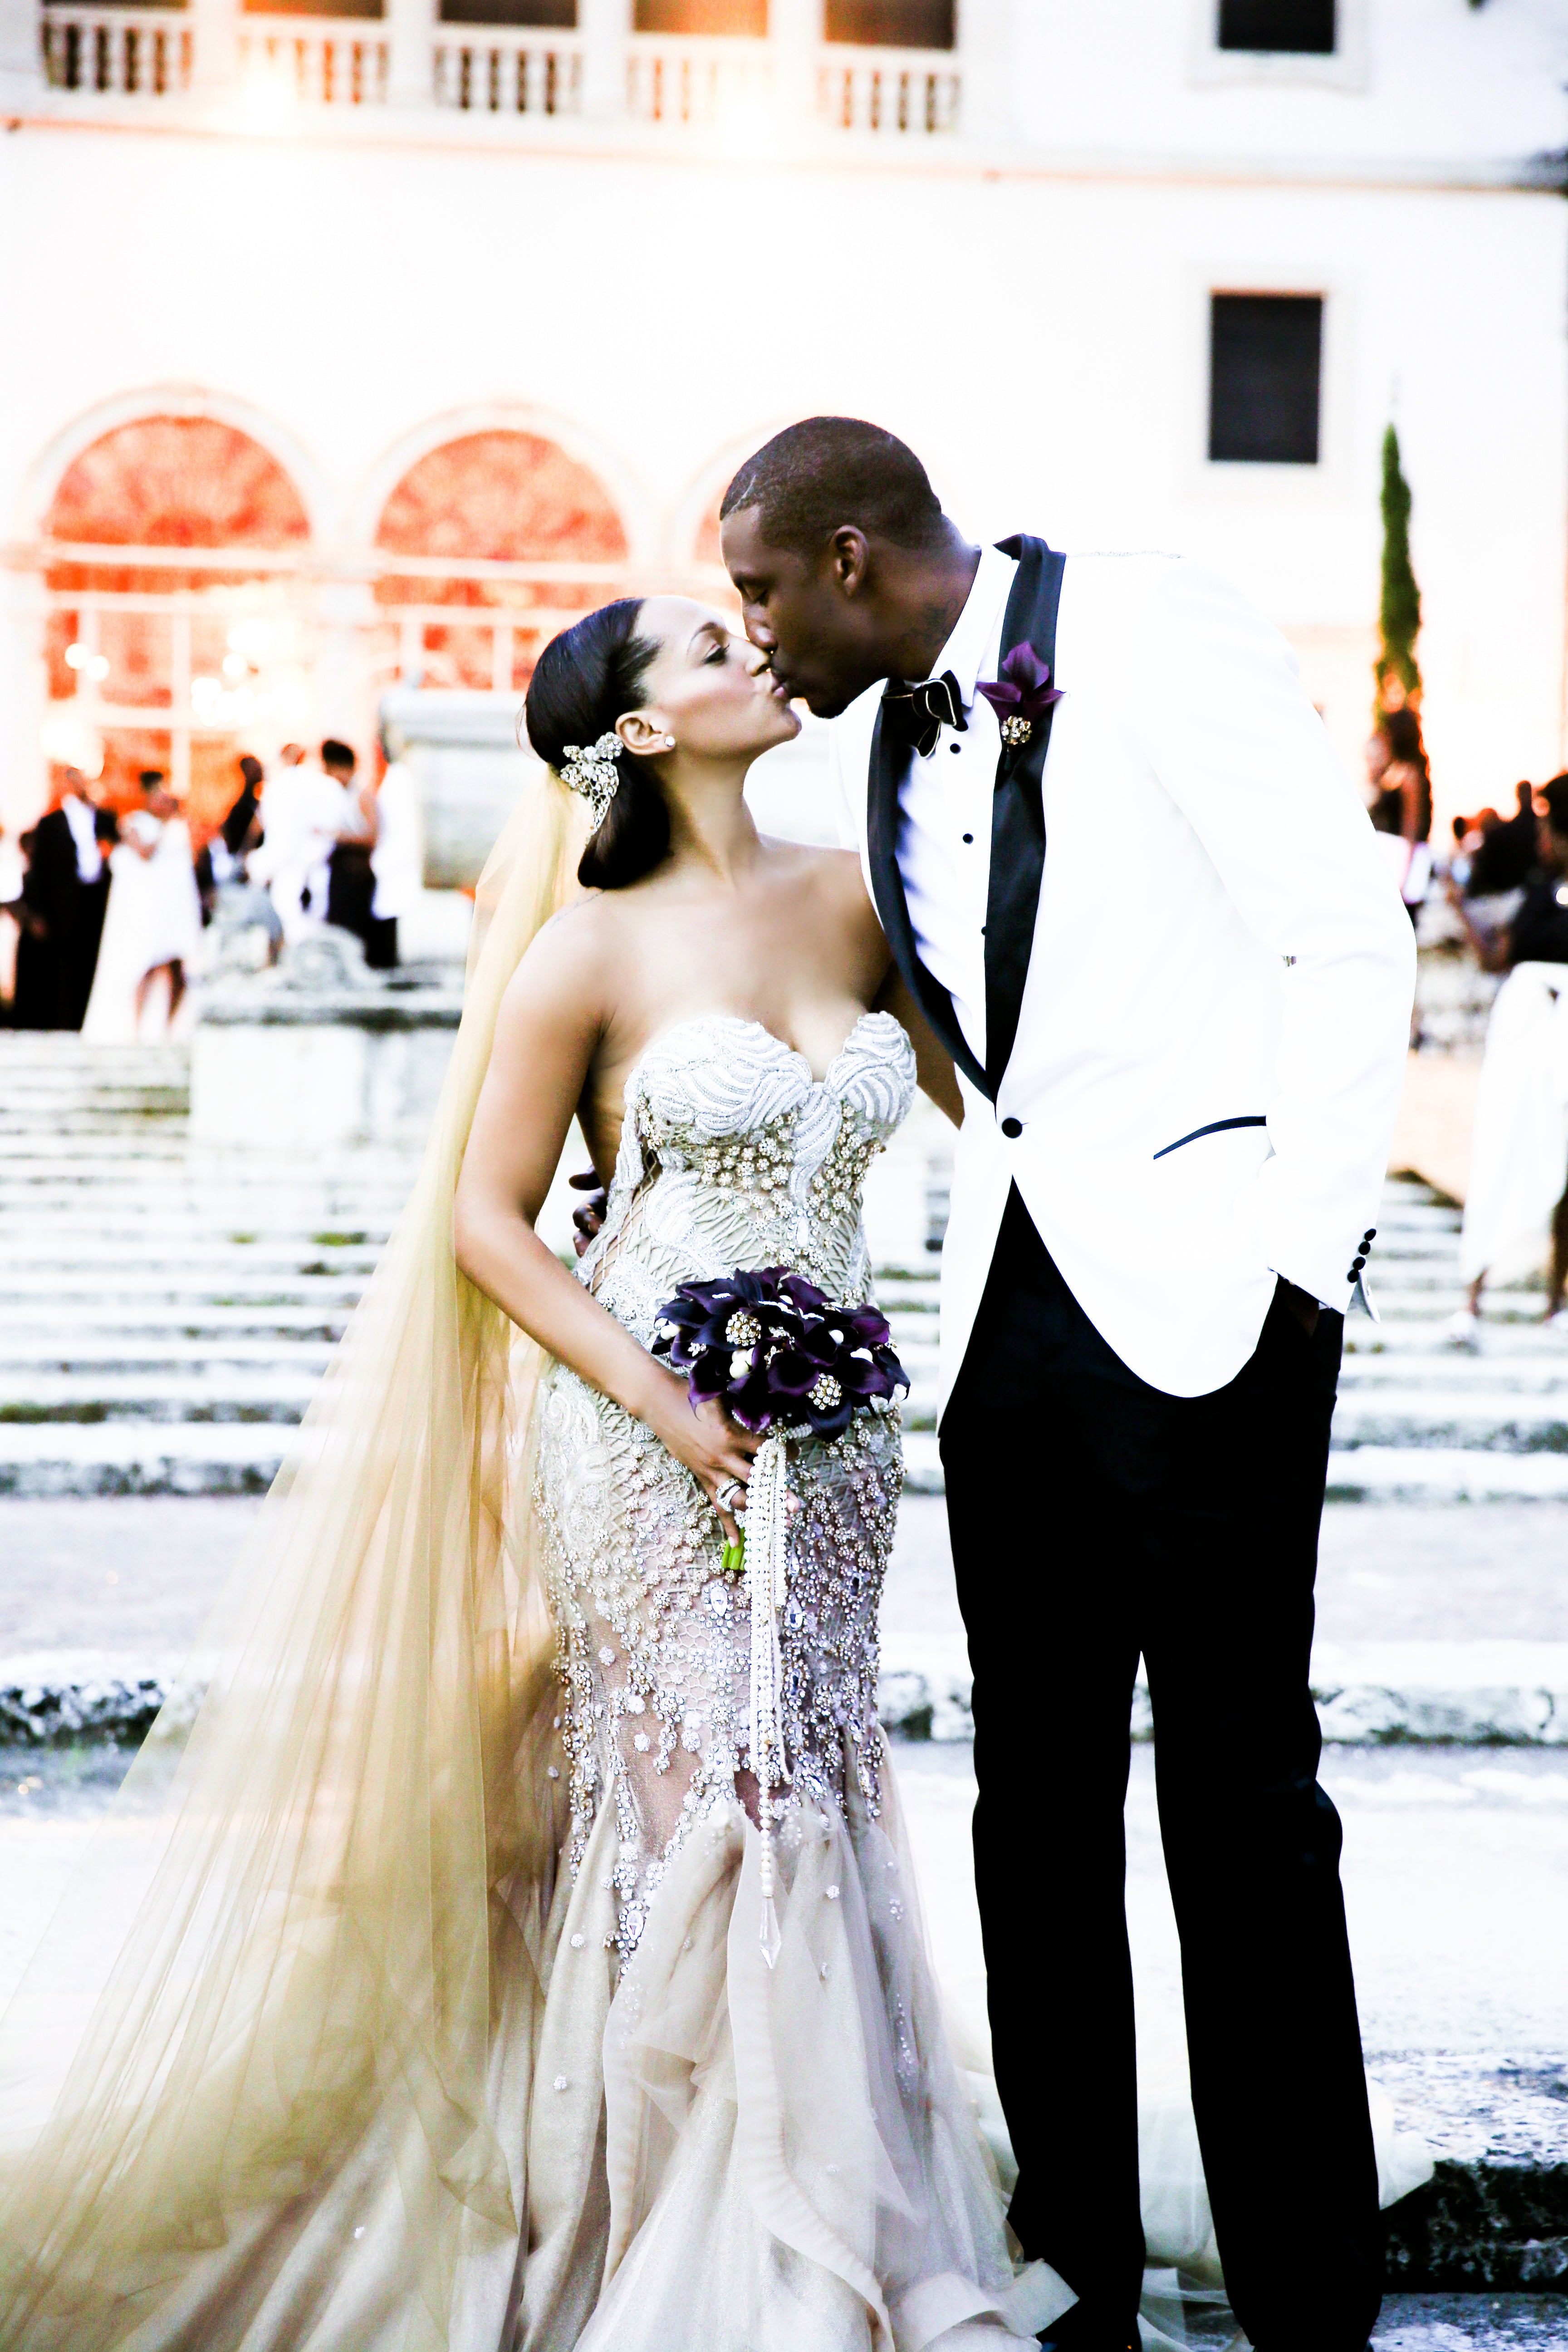 Bridal Bliss Exclusive: Amar'e Stoudemire and Alexis Welch's Wedding Photos